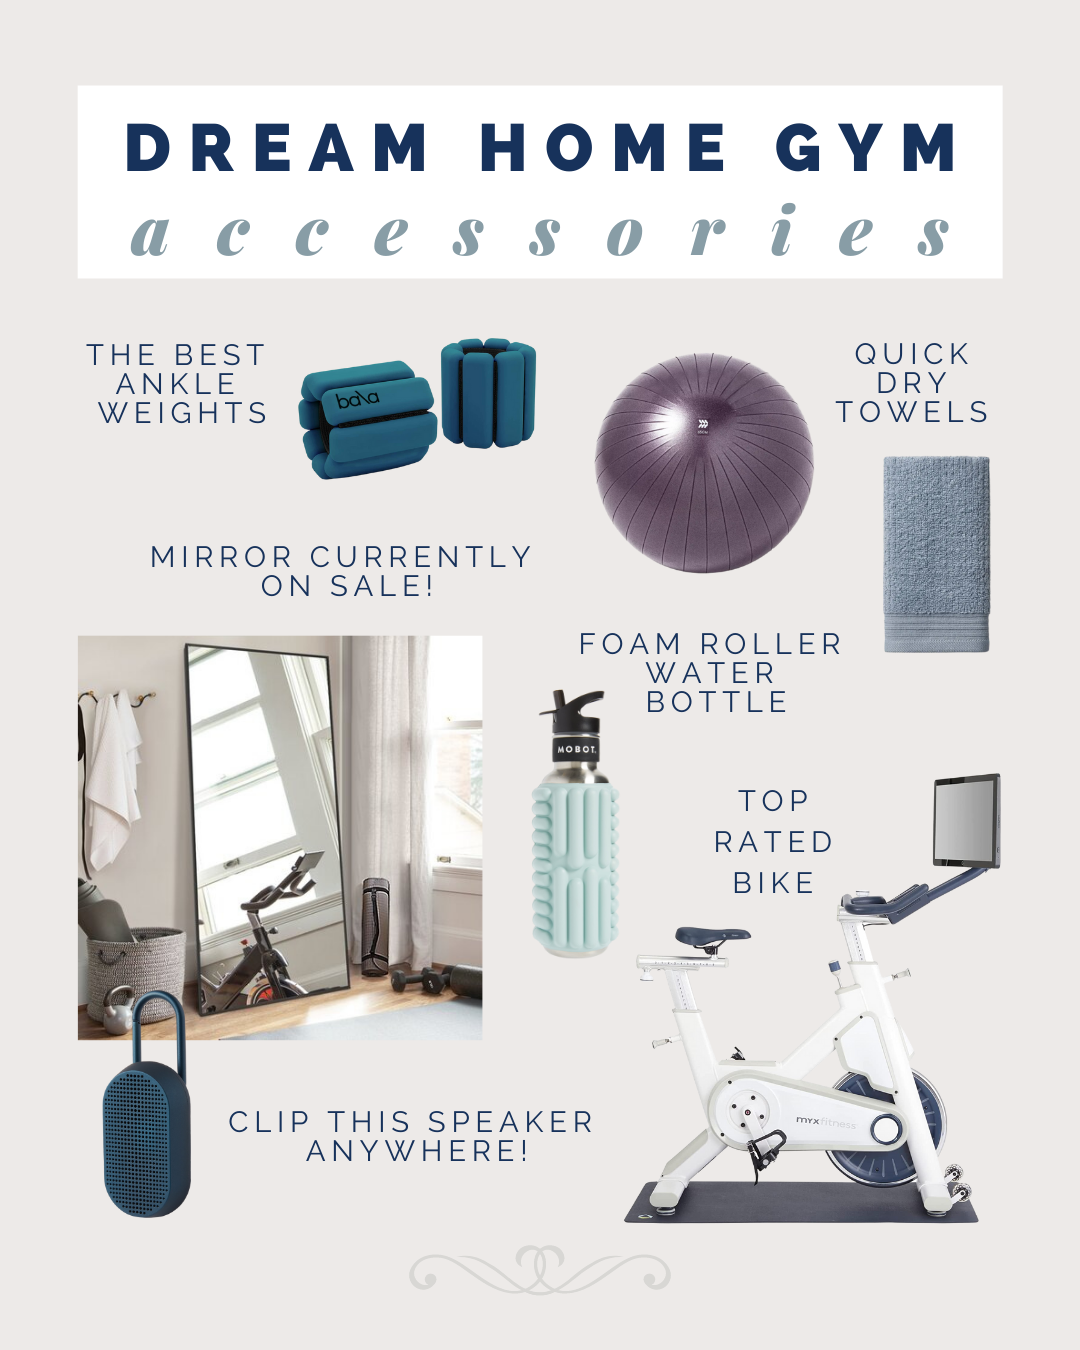 https://allynlewis.com/wp-content/uploads/2021/12/dream-home-gym-accessories.png